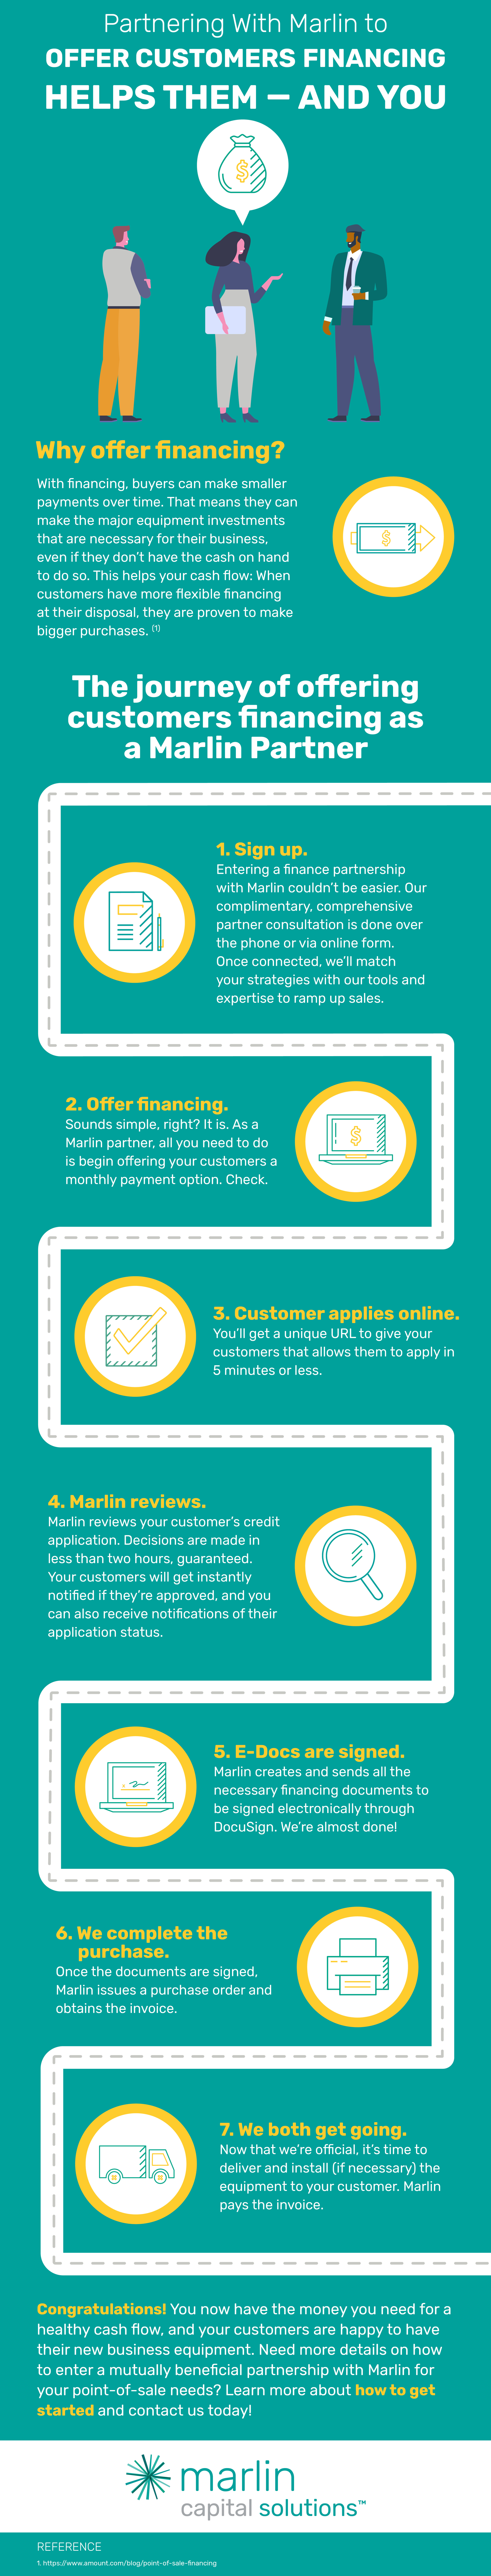 How Partnering with Marlin Helps You Infographic